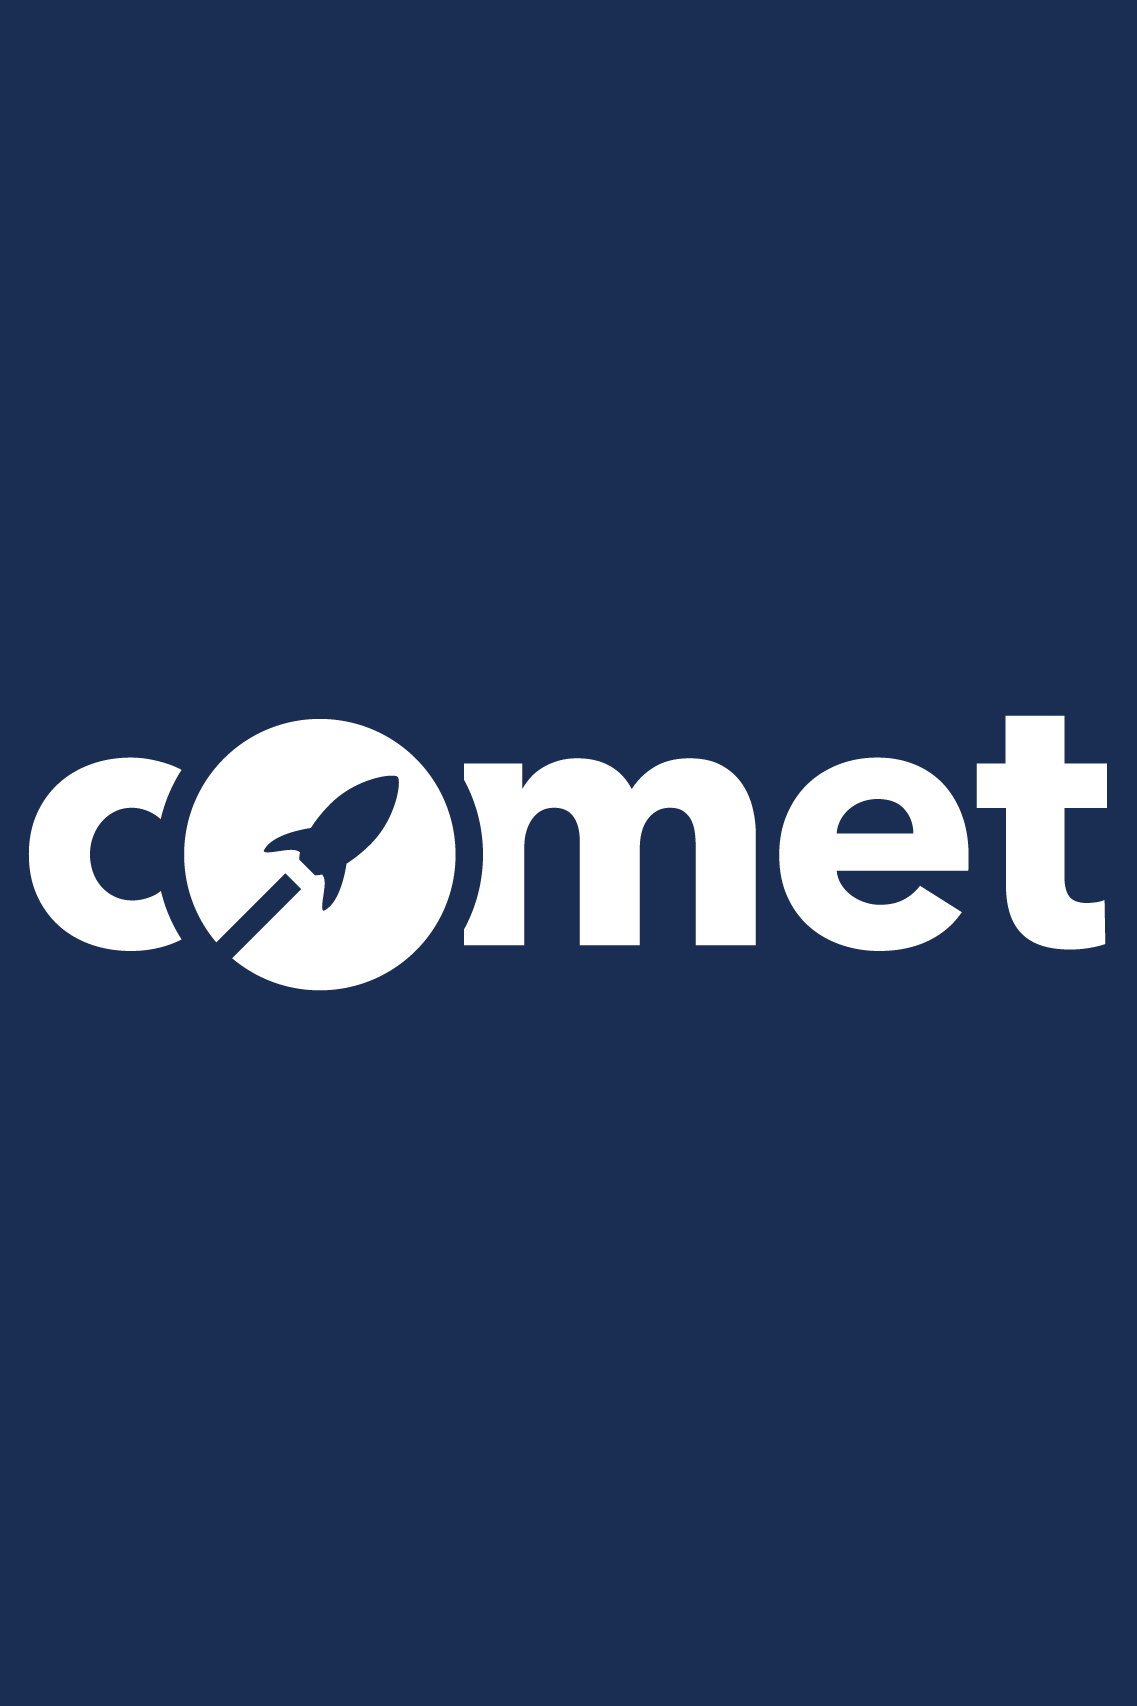 Logo proposal for the Comet brand by Xavier Wendling